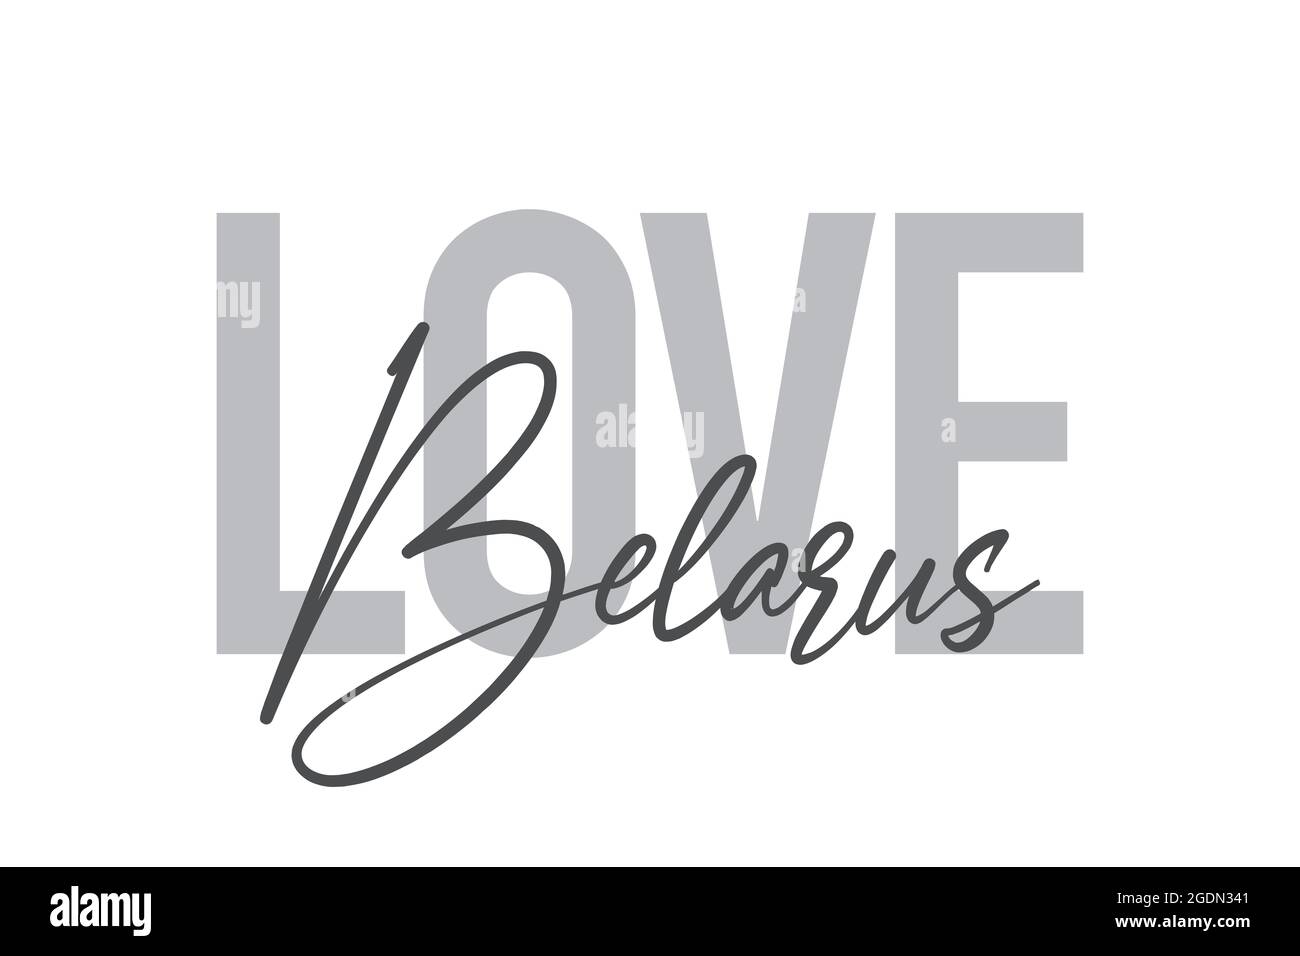 Modern, simple, minimal typographic design of a saying 'Love Belarus' in tones of grey color. Cool, urban, trendy and playful graphic vector art with Stock Photo